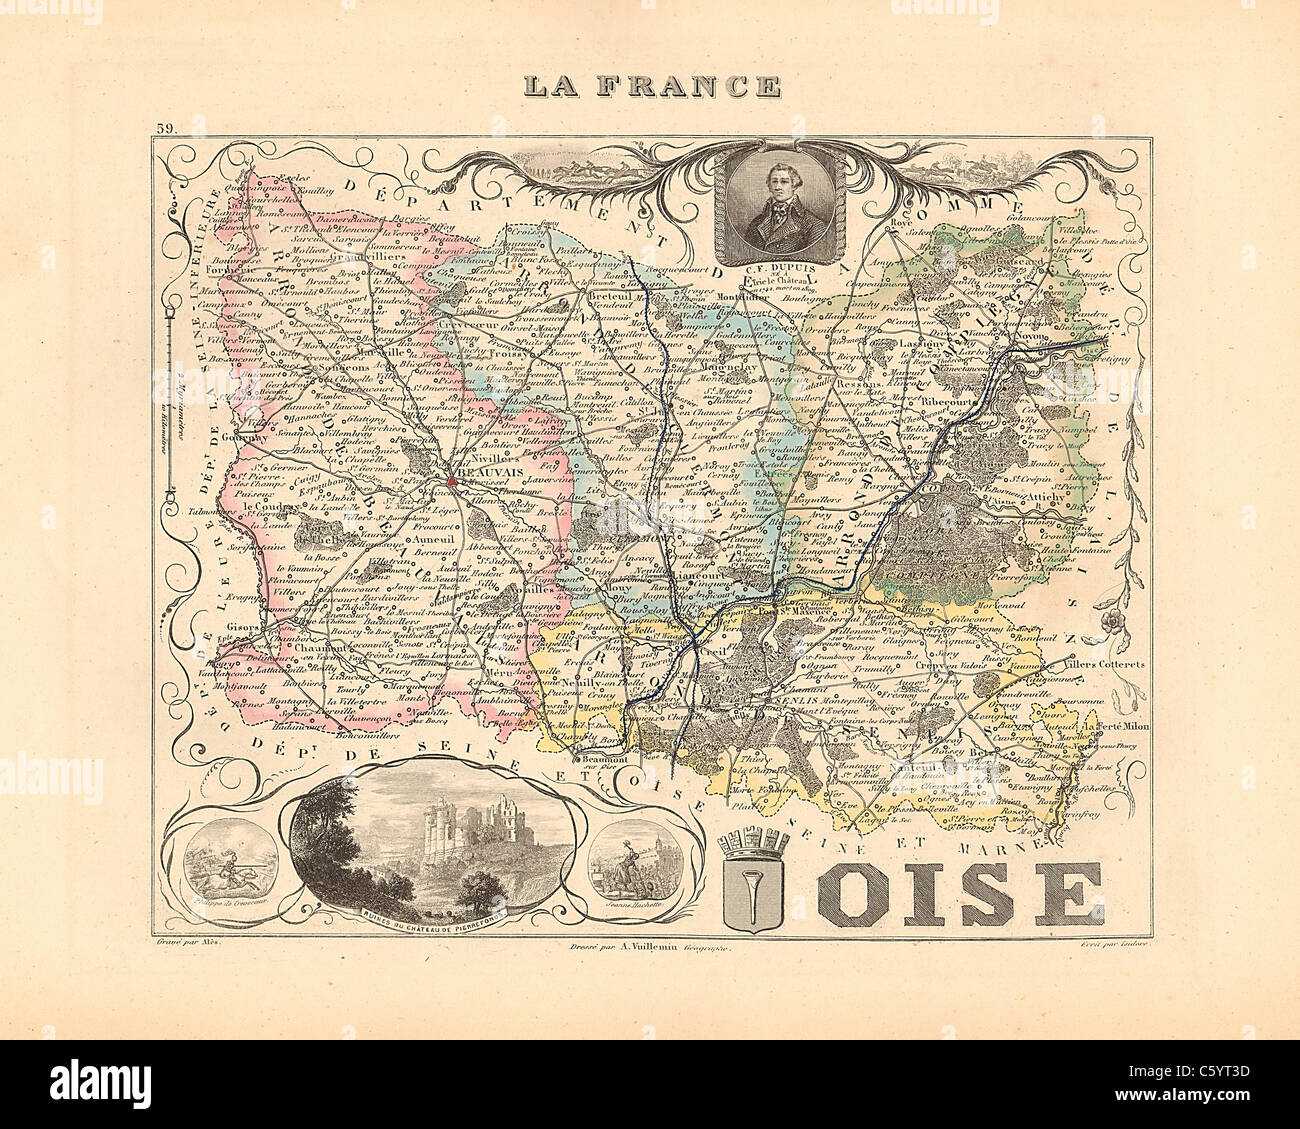 Oise Department -  Antiquarian Map from an 1858 French Atlas 'France and its Colonies' (La France et ses Colonies ) by Alexandre Vuillemin Stock Photo